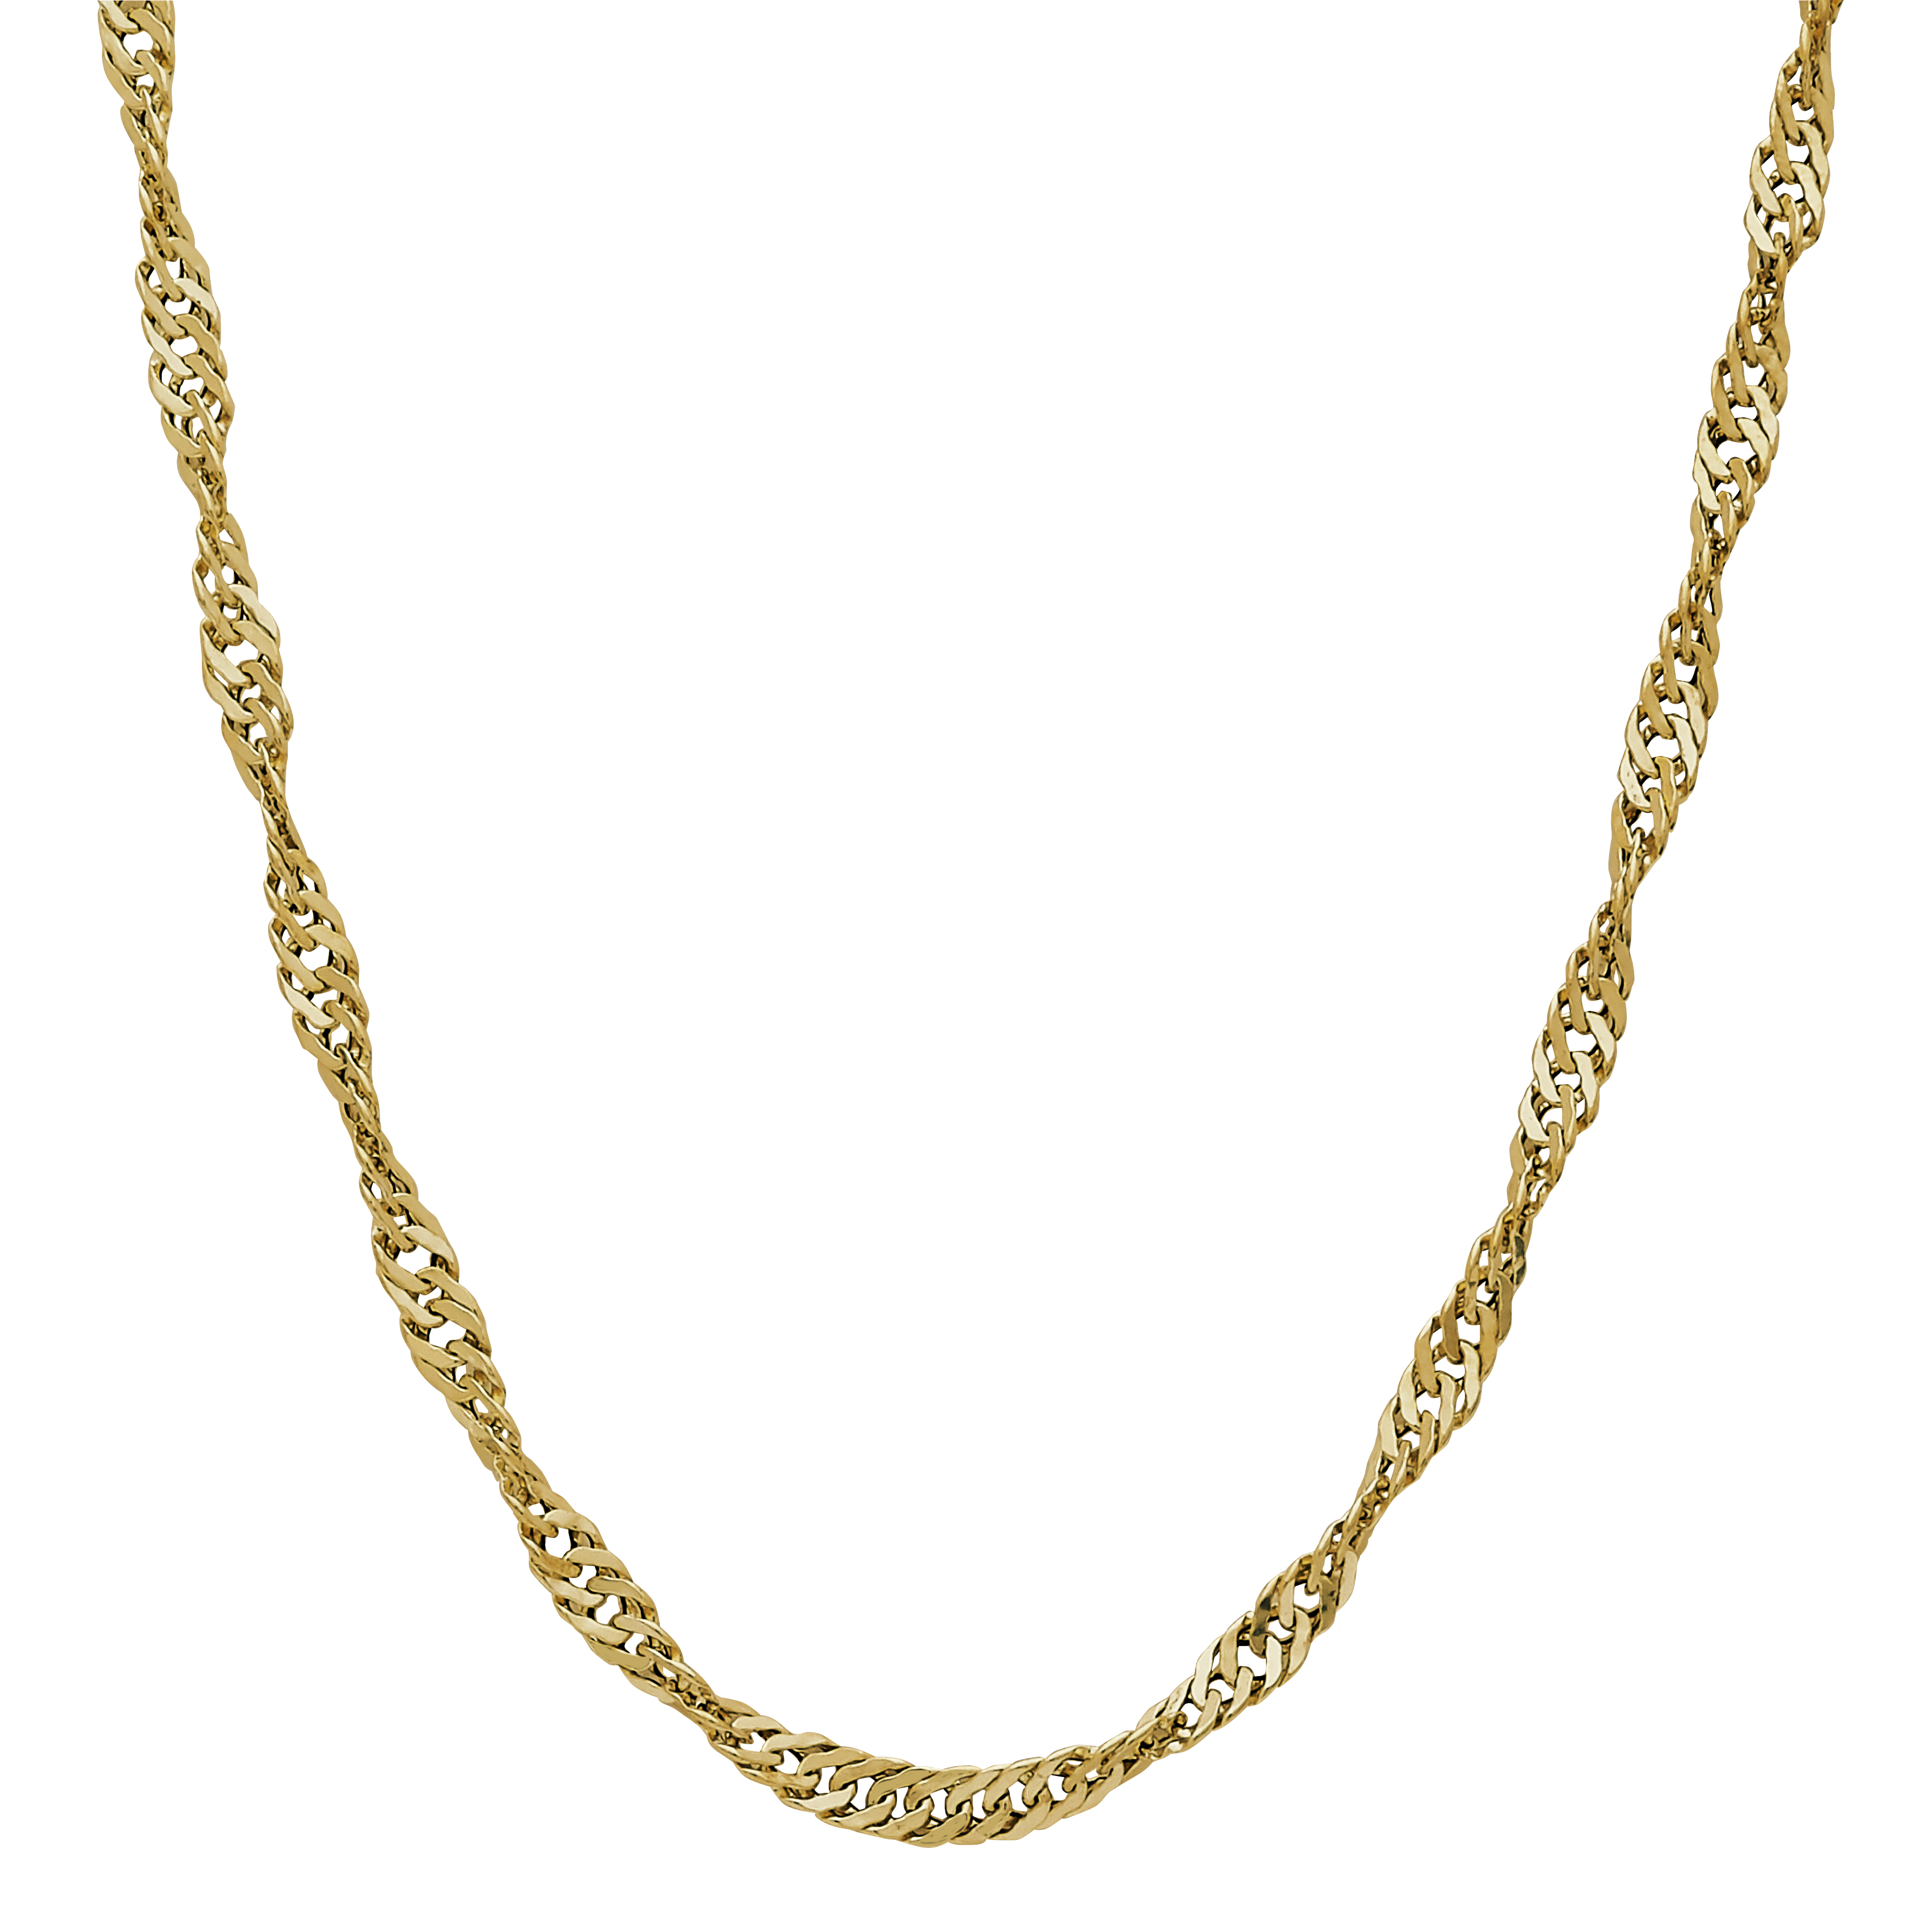 10K Yellow Gold Cubic Zirconia Necklace